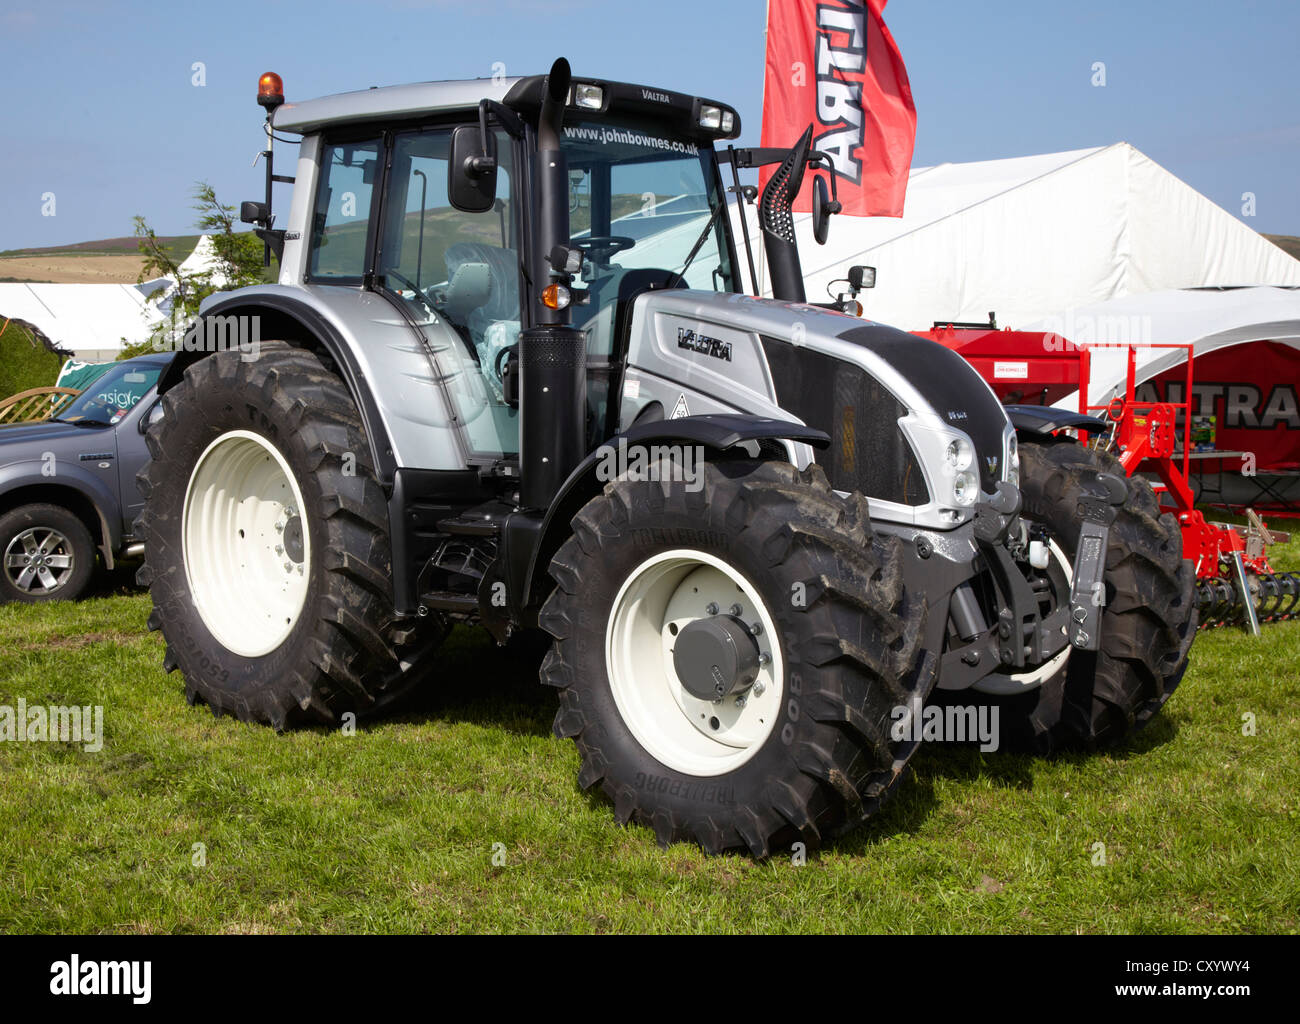 Valtra Tractor High Resolution Stock Photography and Images Alamy